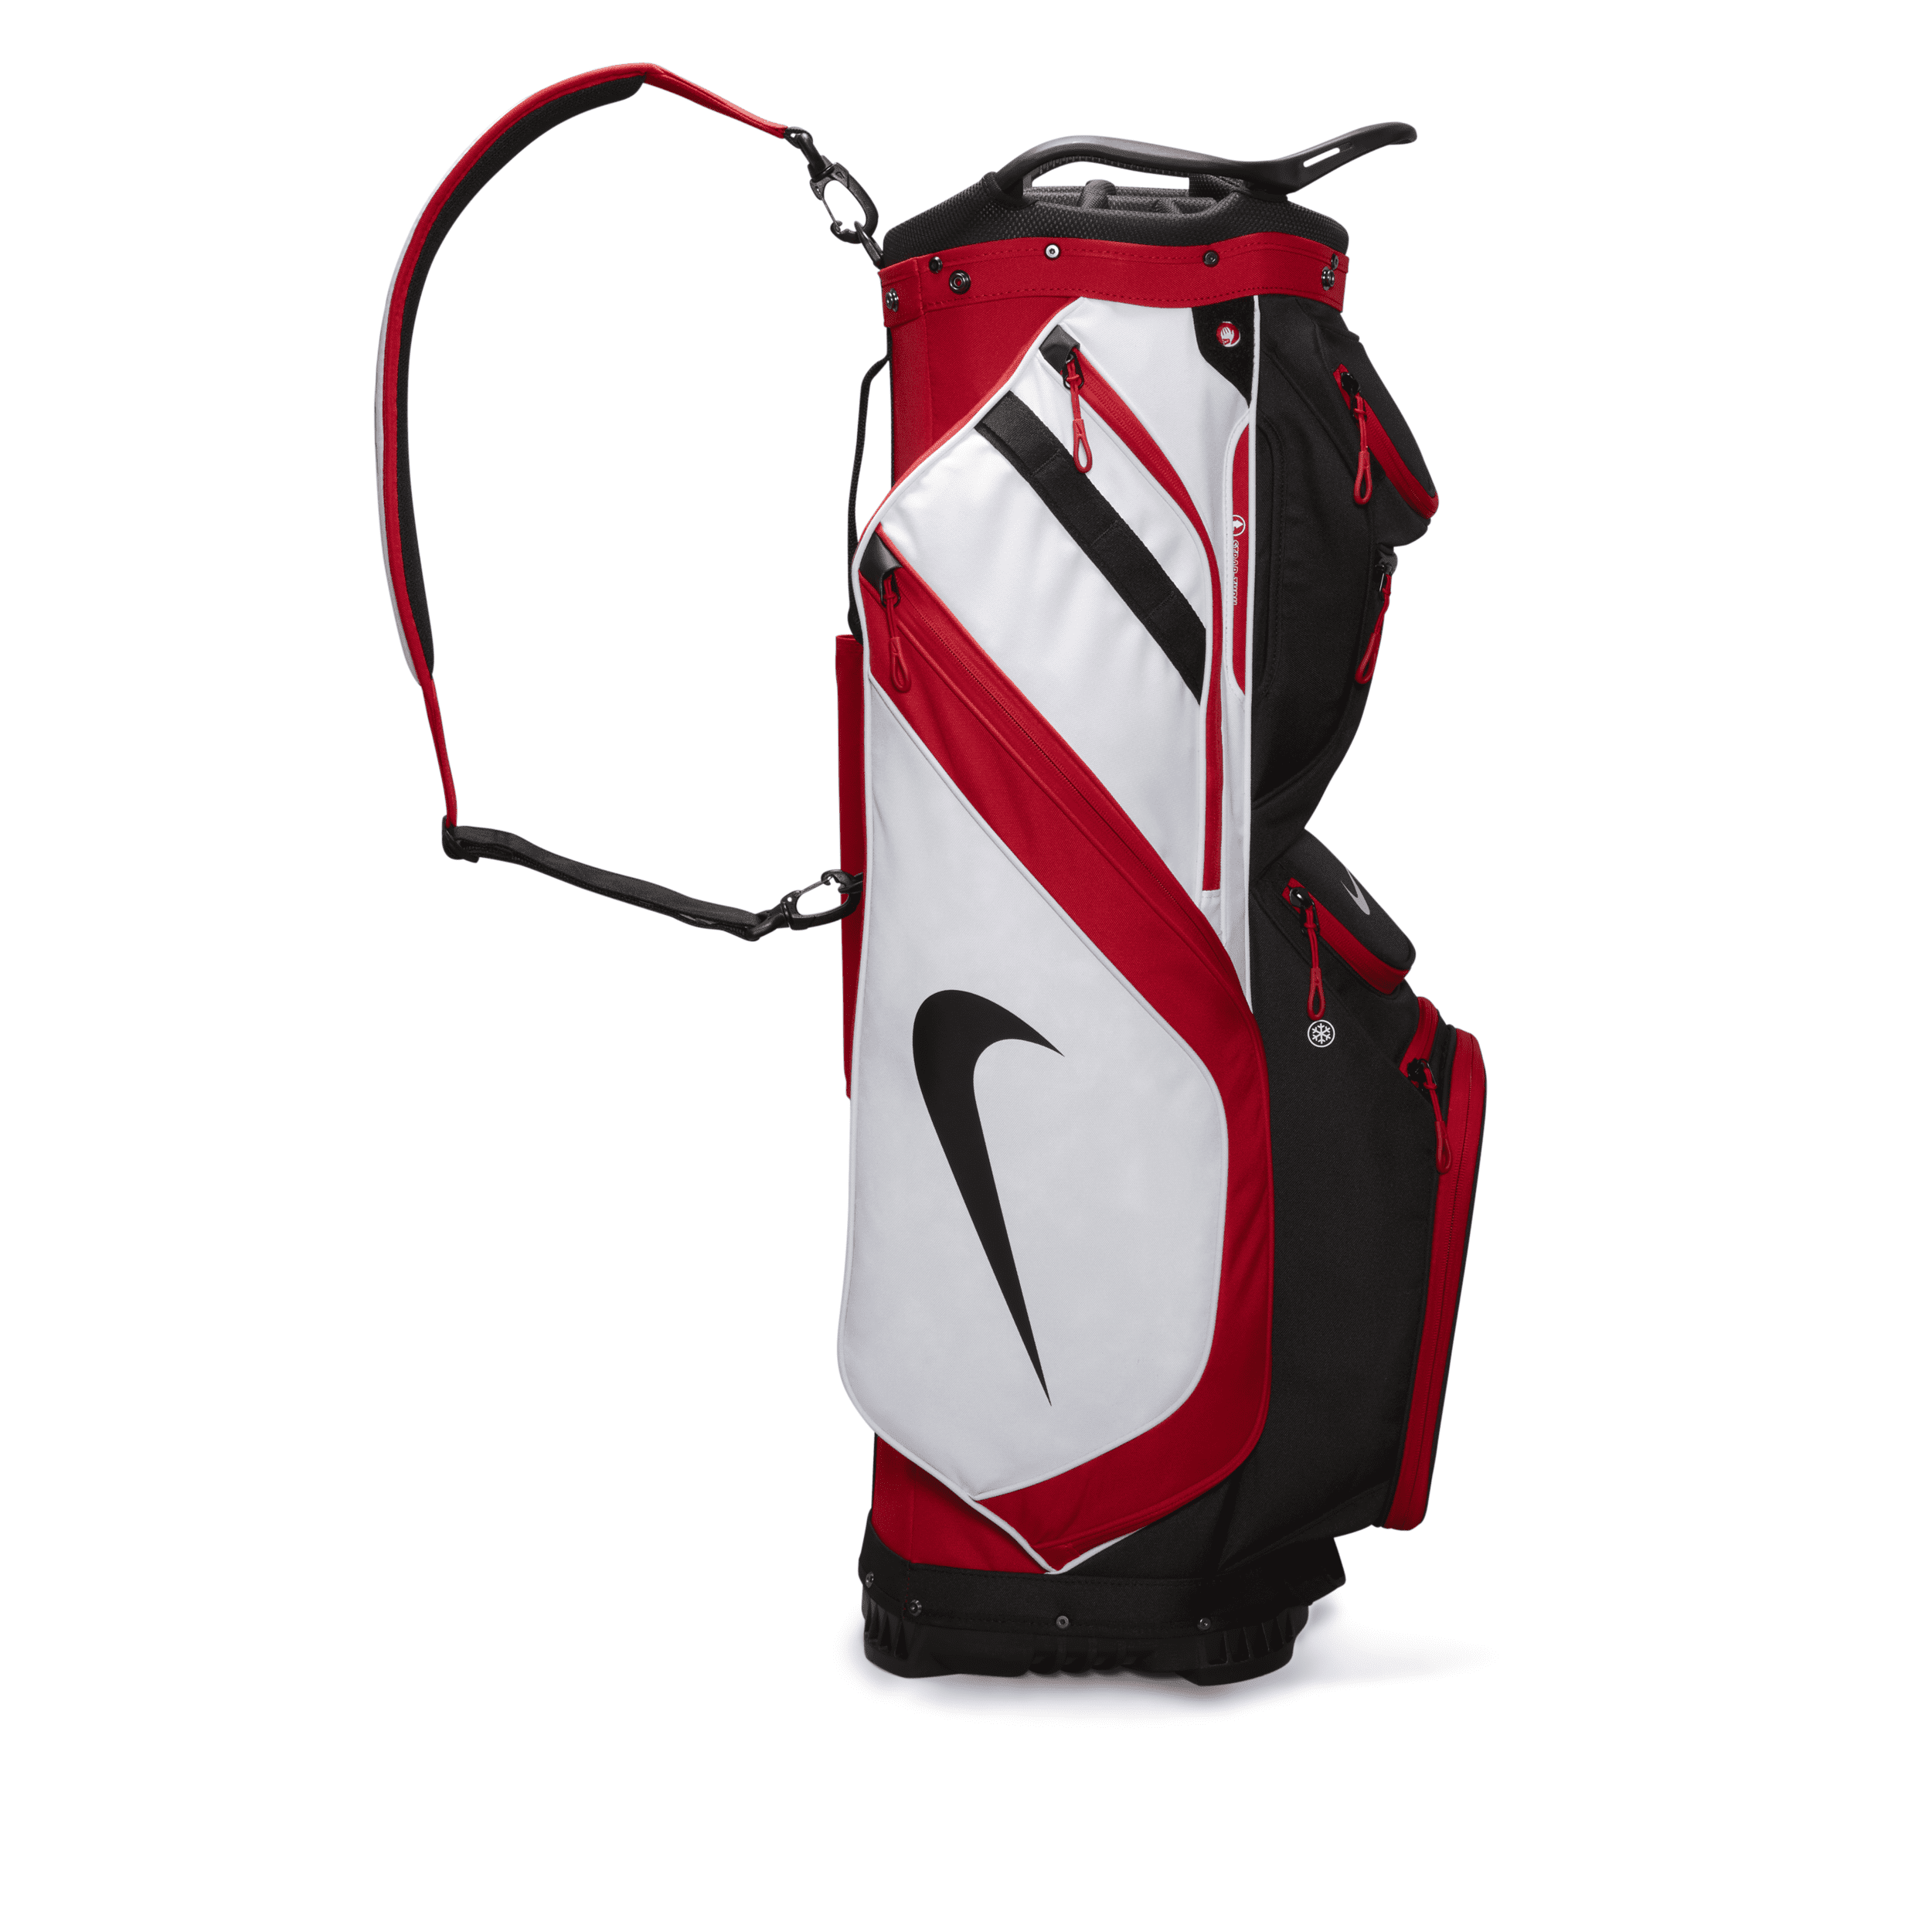 Nike Unisex Performance Cart Golf Bag In Red